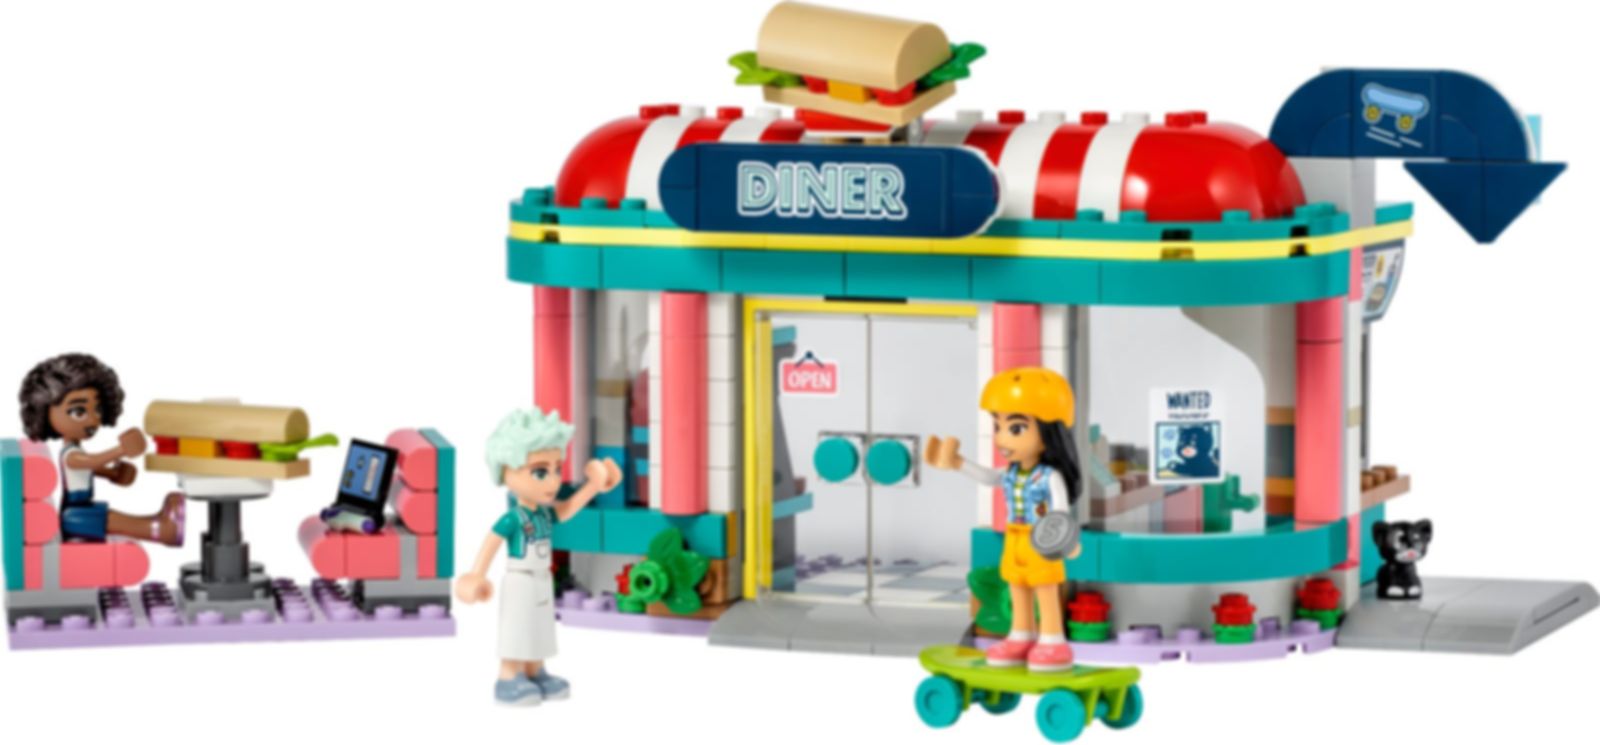 LEGO® Friends Heartlake Downtown Diner gameplay